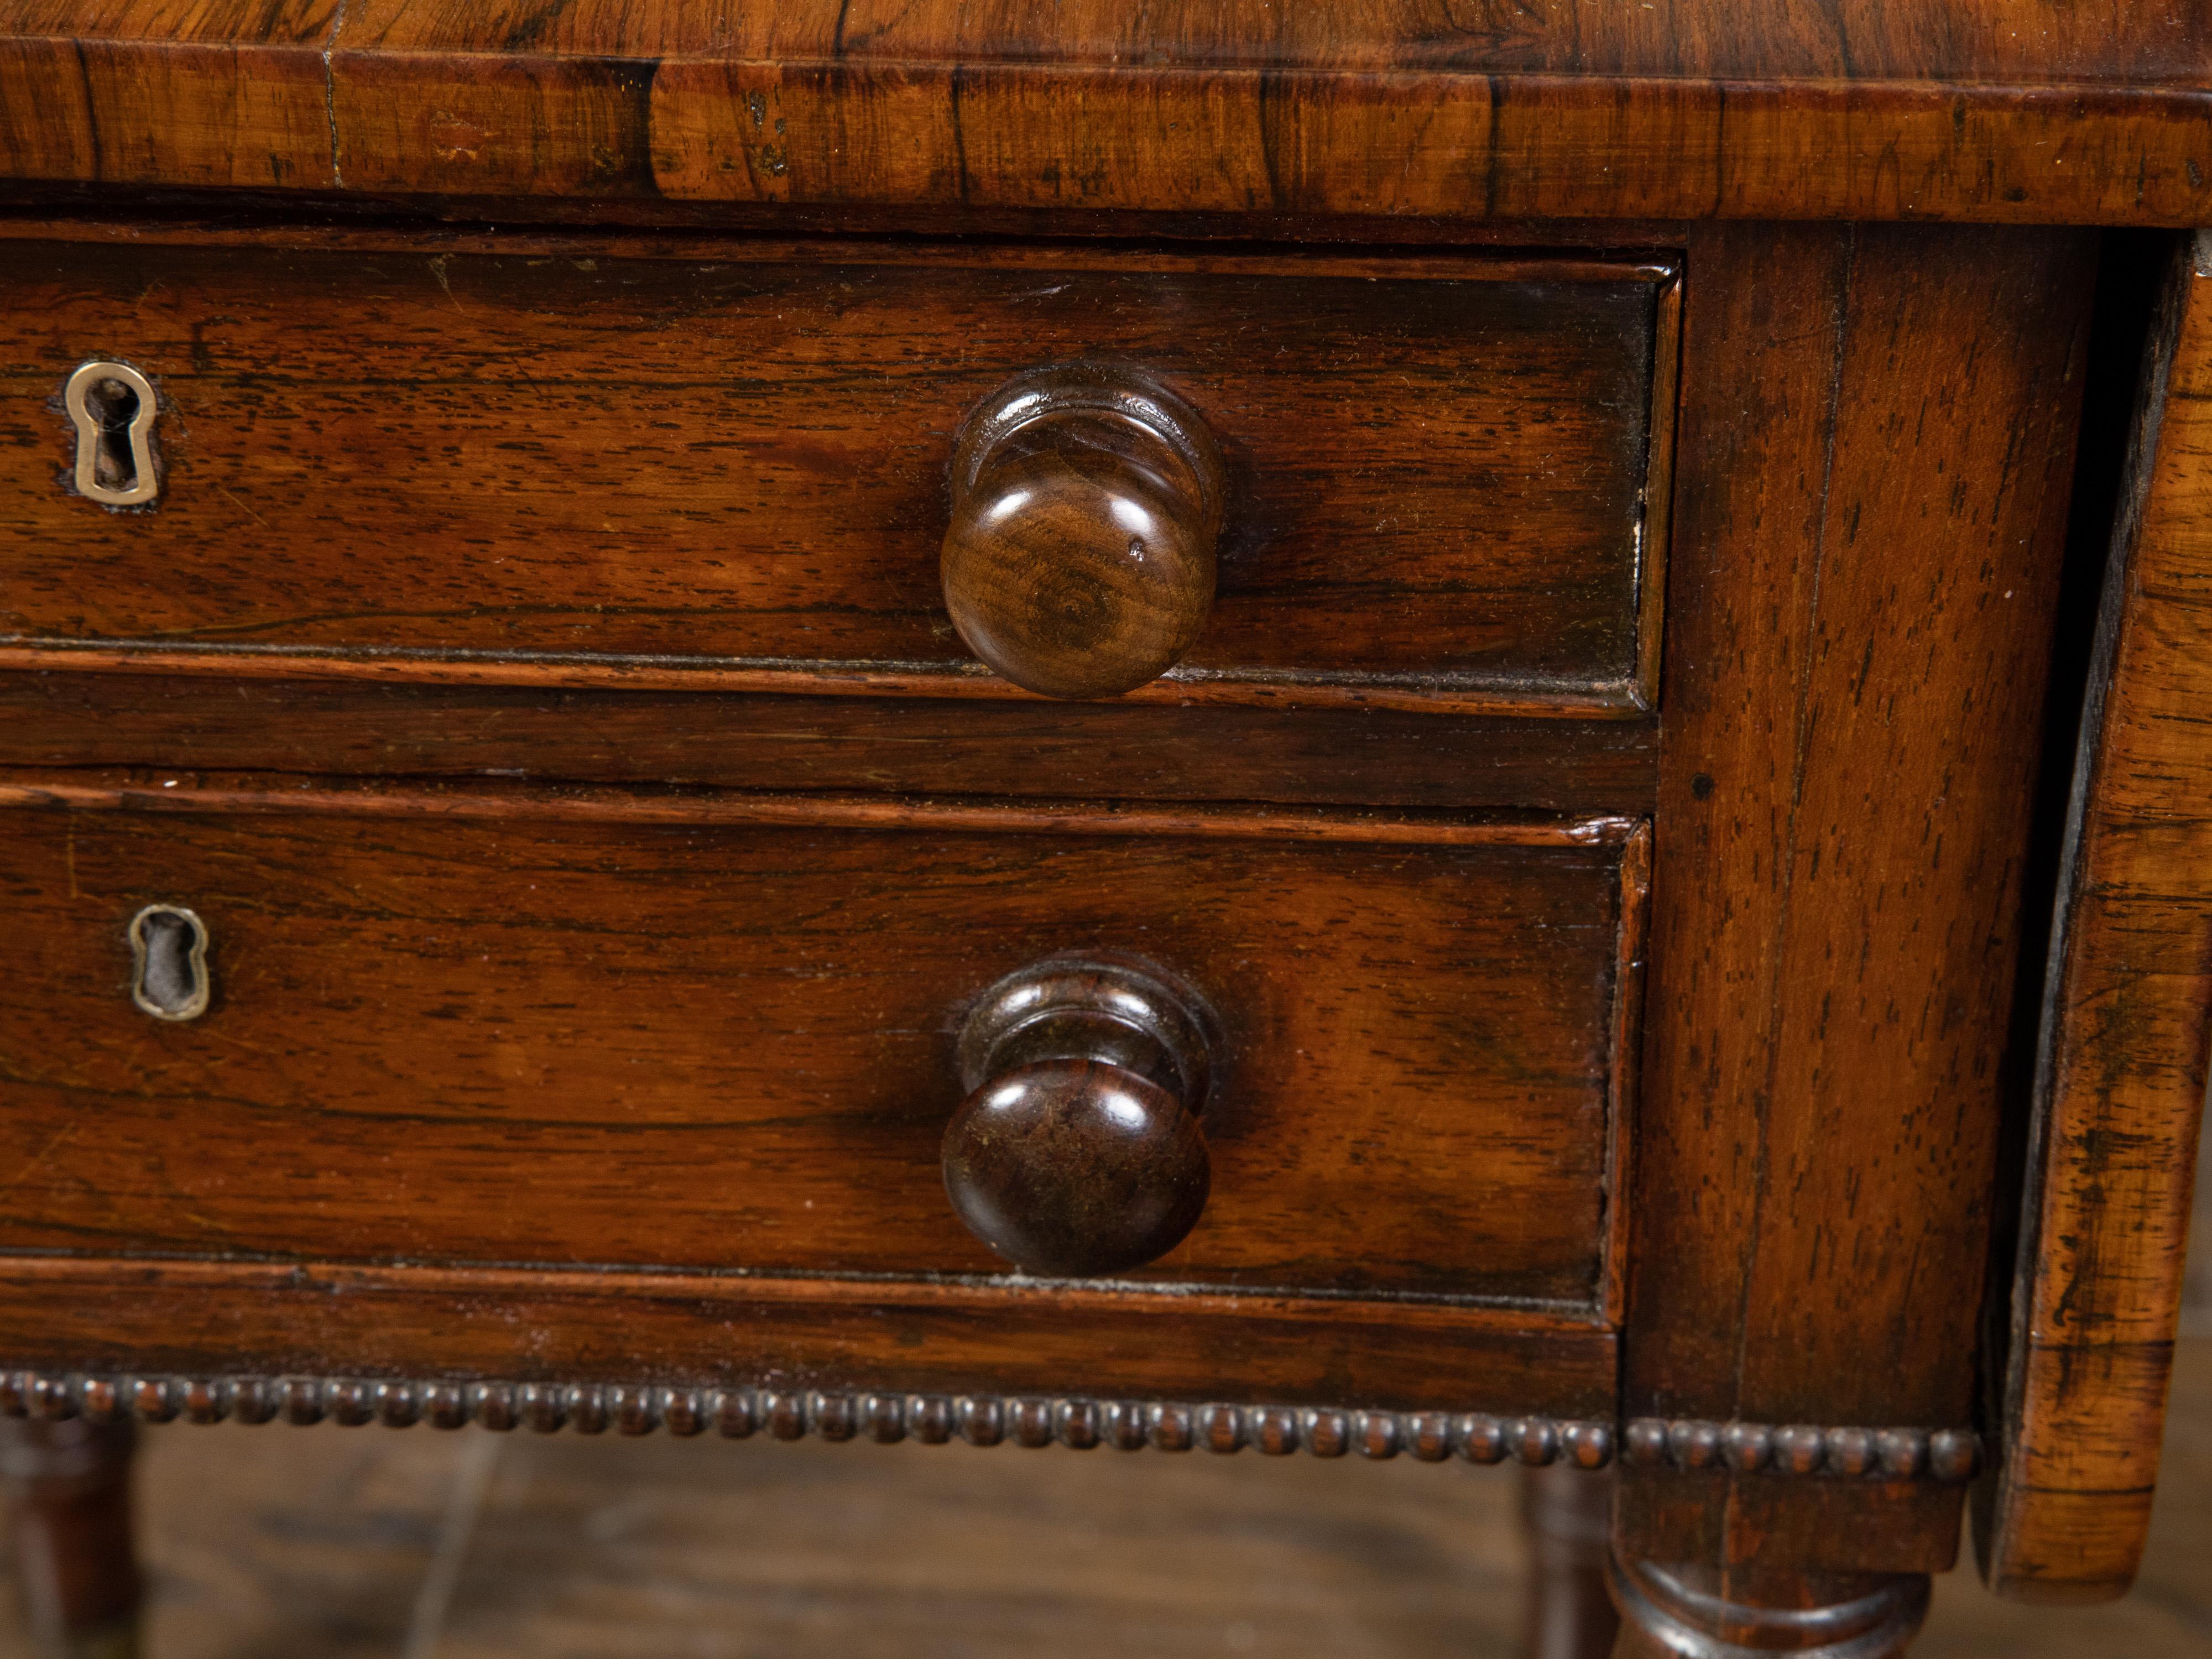 English Regency 1820s Mahogany Pembroke Table with Drop Leaves and Drawers For Sale 4